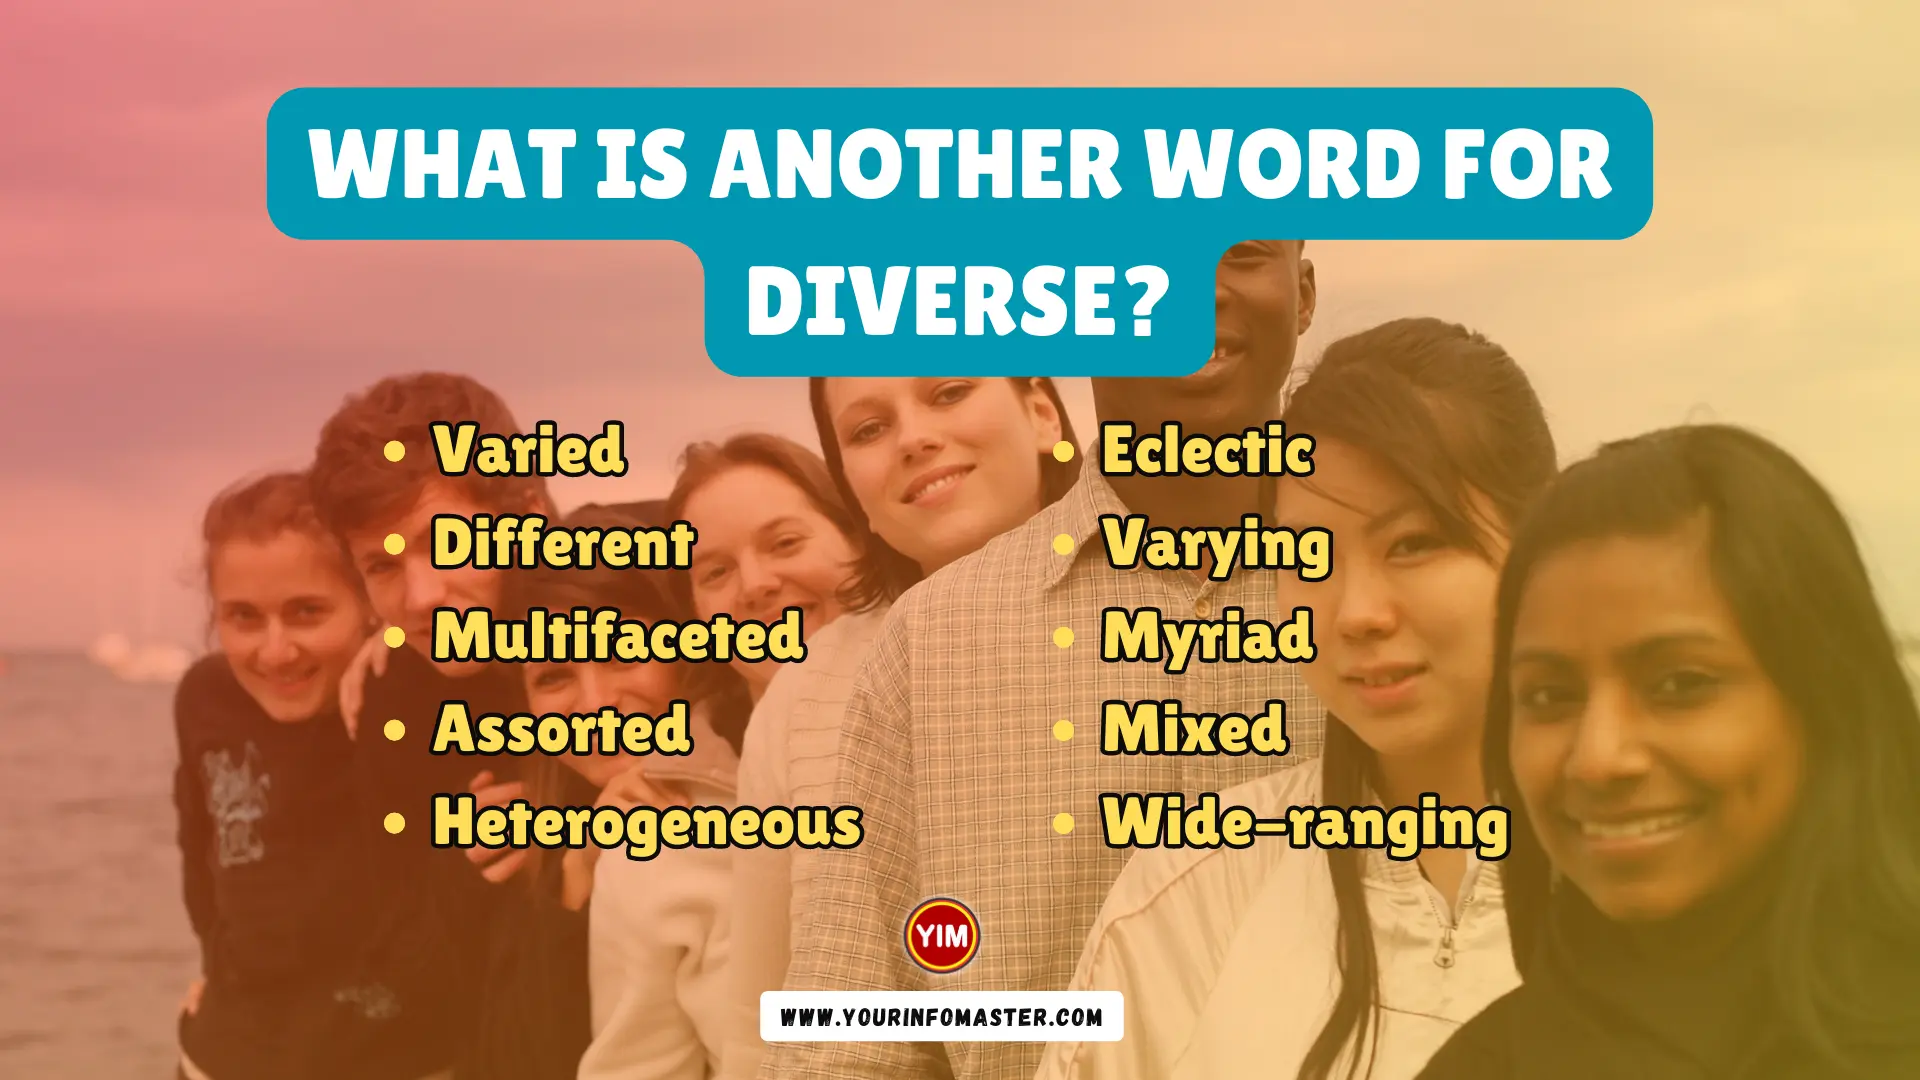 What is another word for Diverse